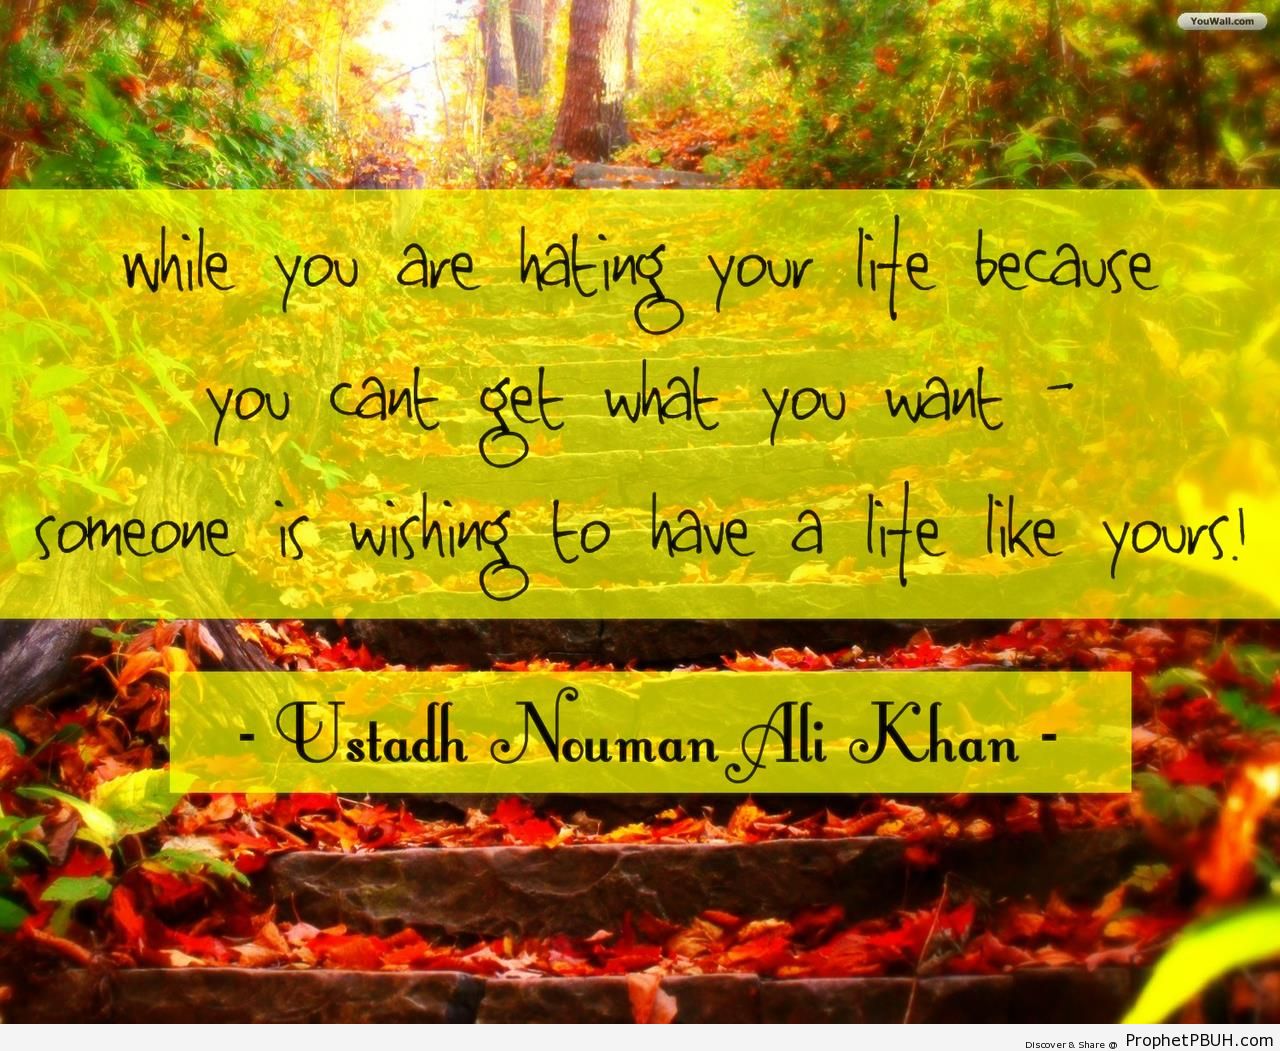 Nouman Ali Khan- While you are hating your life& - Islamic Quotes 